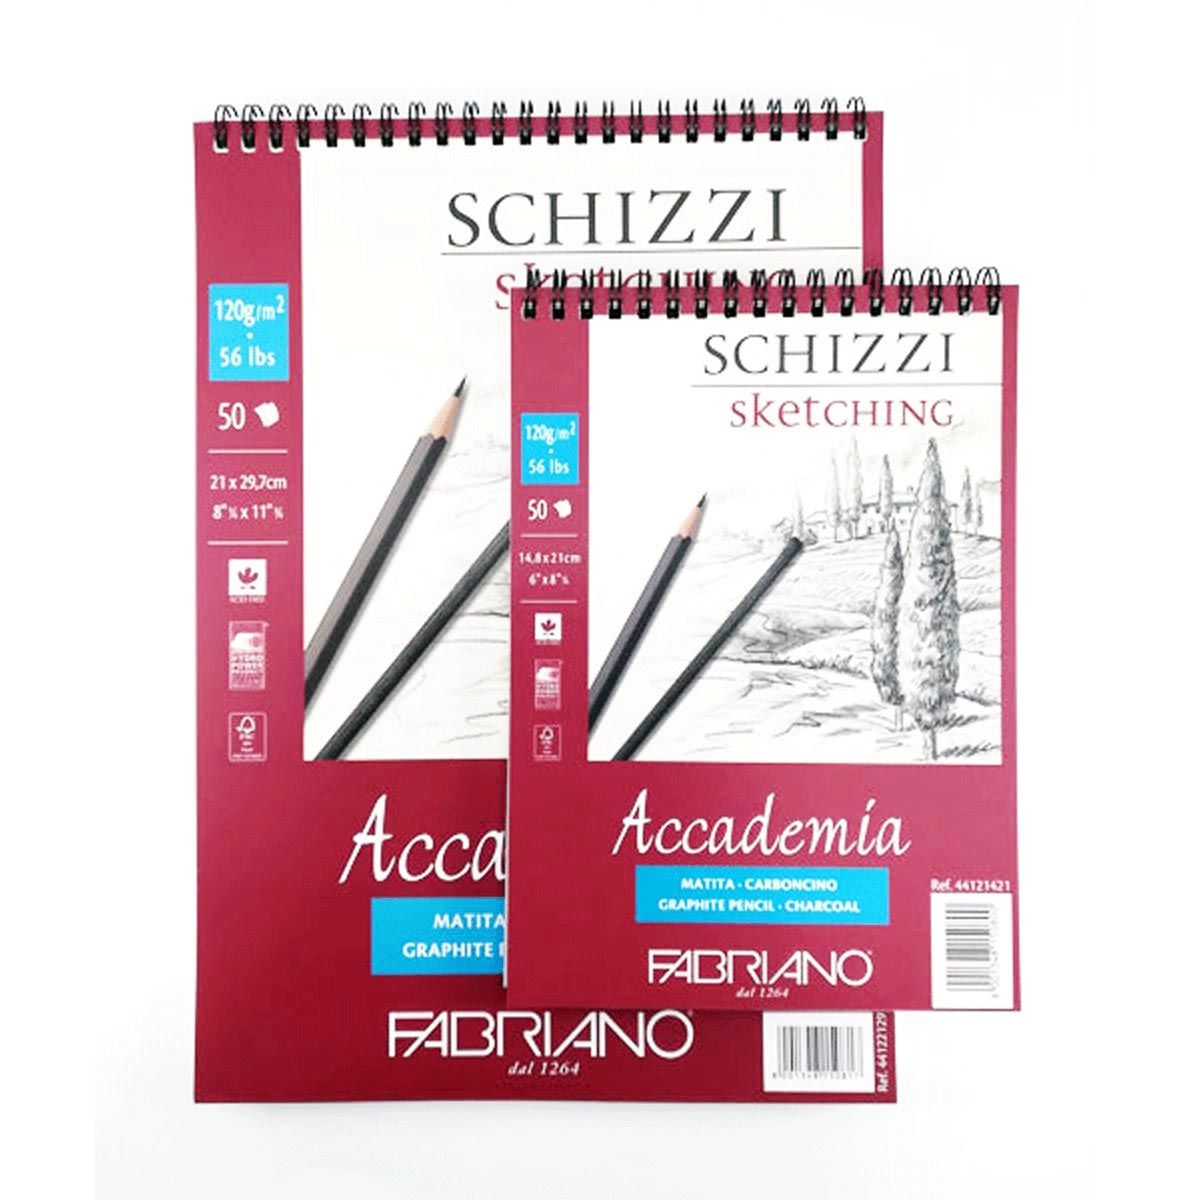 Fabriano Accademia Sketching Pads